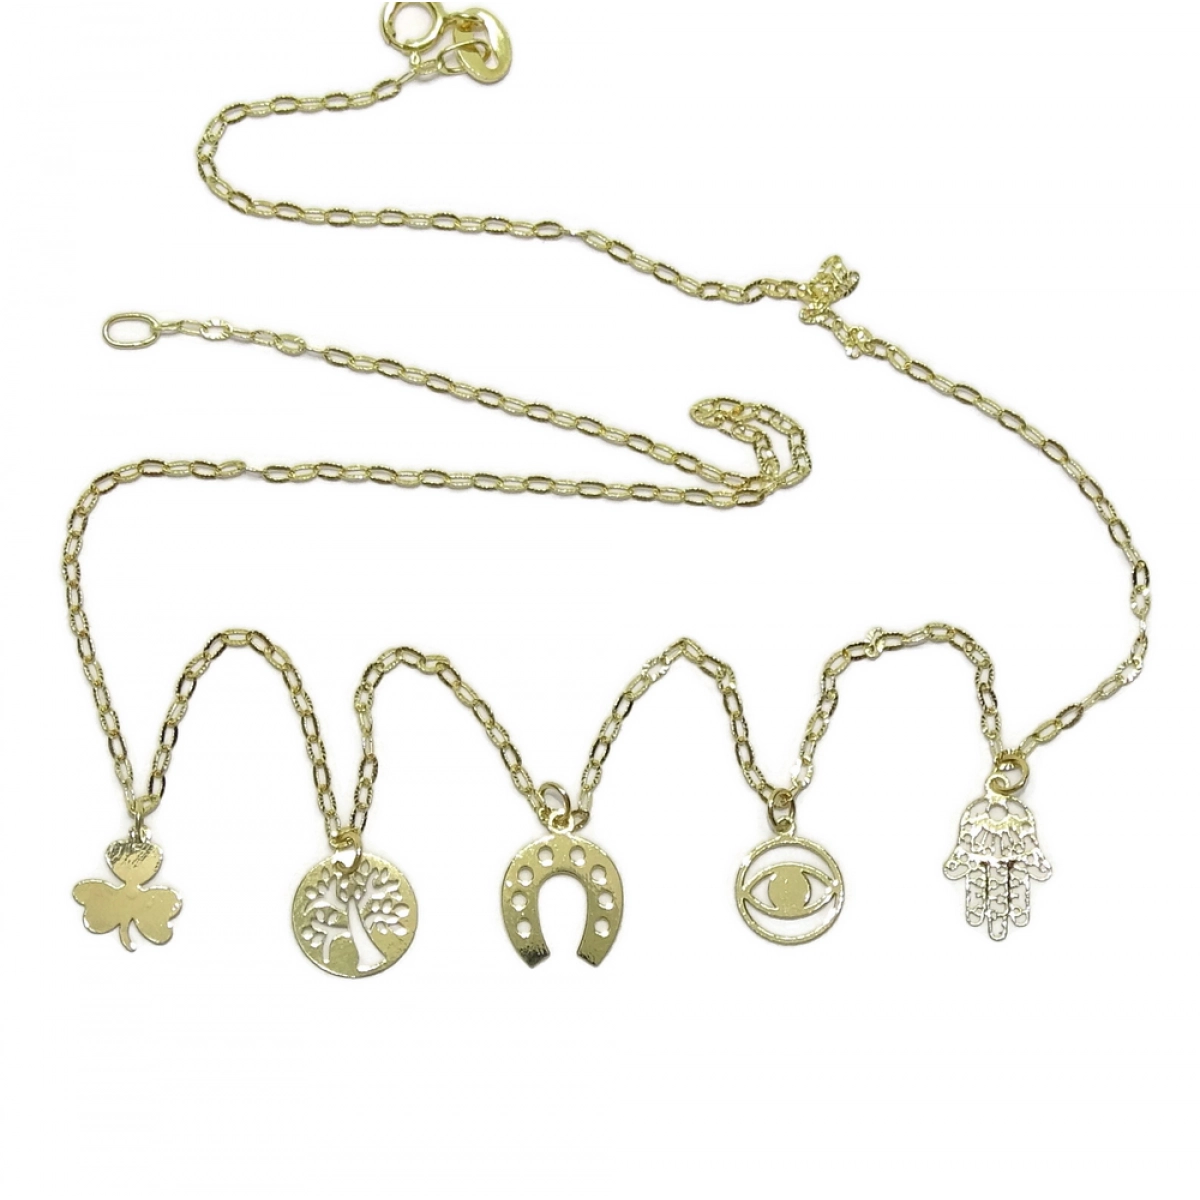 NECKLACE OF THE LUCKY 18K GOLD 5 S�SYMBOLS 40CM LONG. 1.45 GRAMS OF GOLD, NEVER SAY NEVER